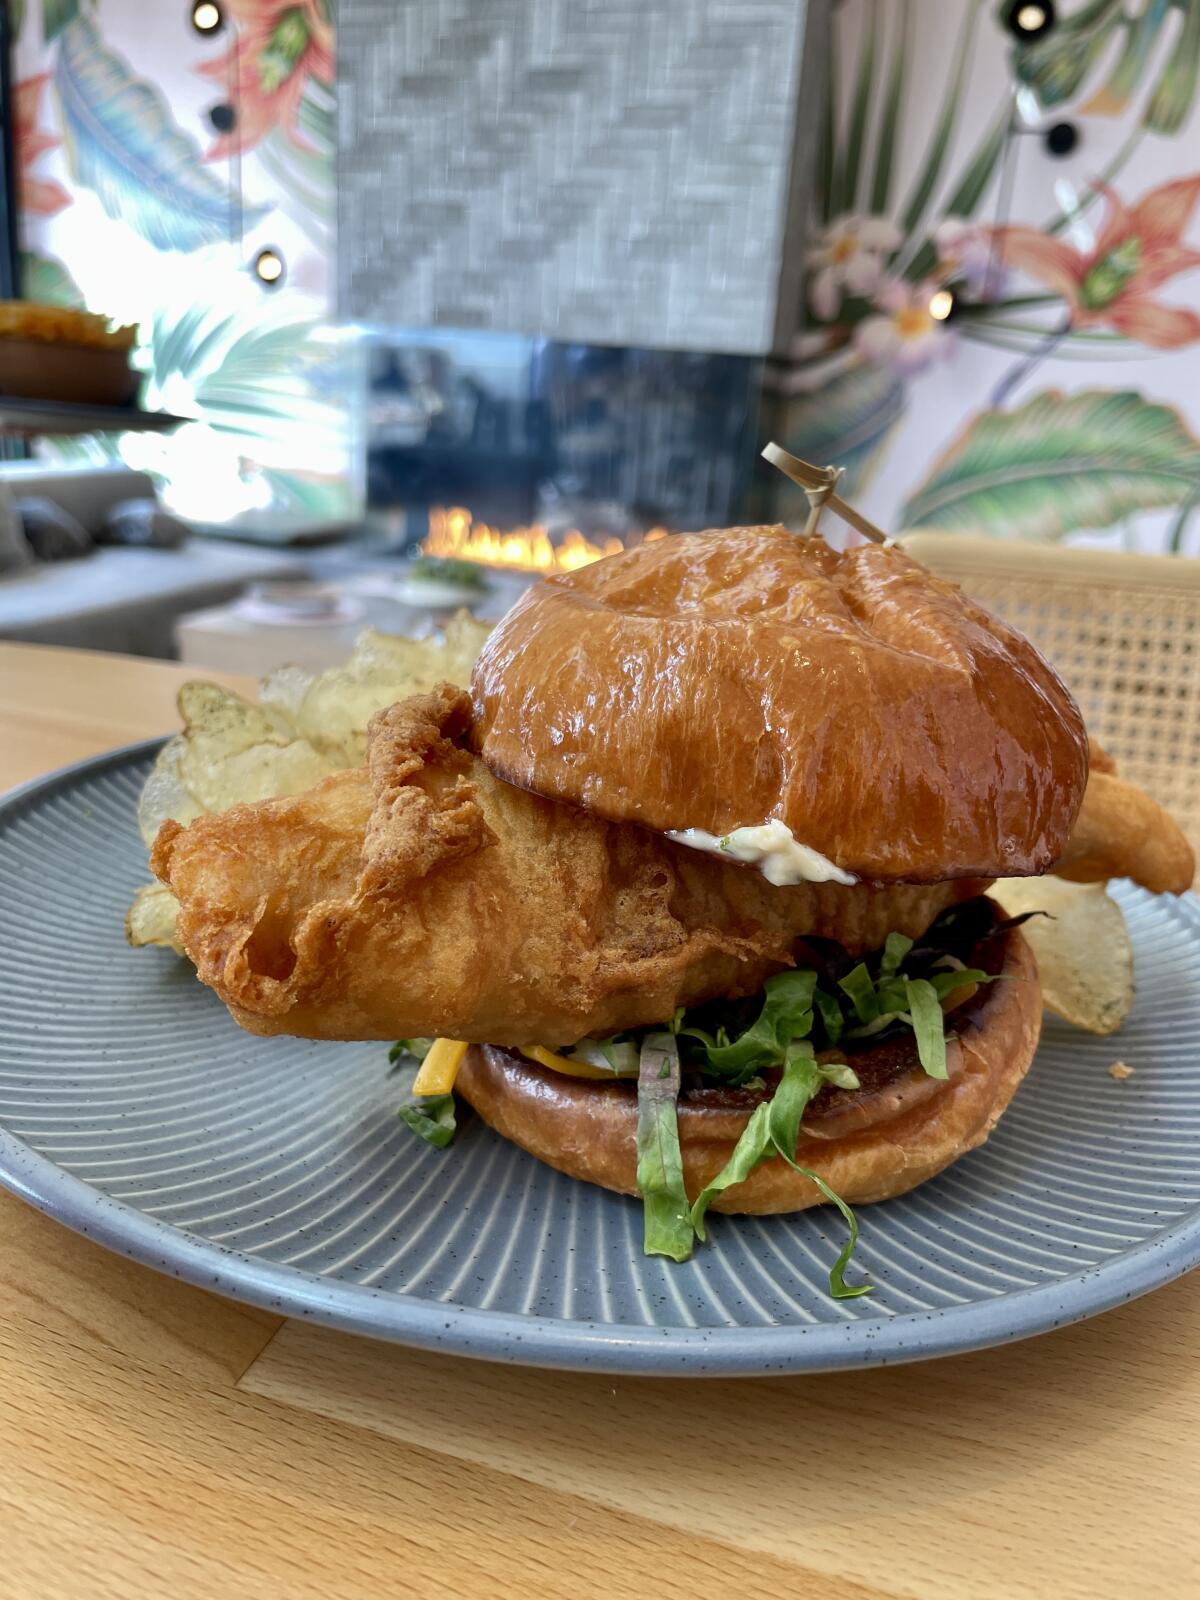 A huge fried-fish sandwich on a plate at a restaurant.